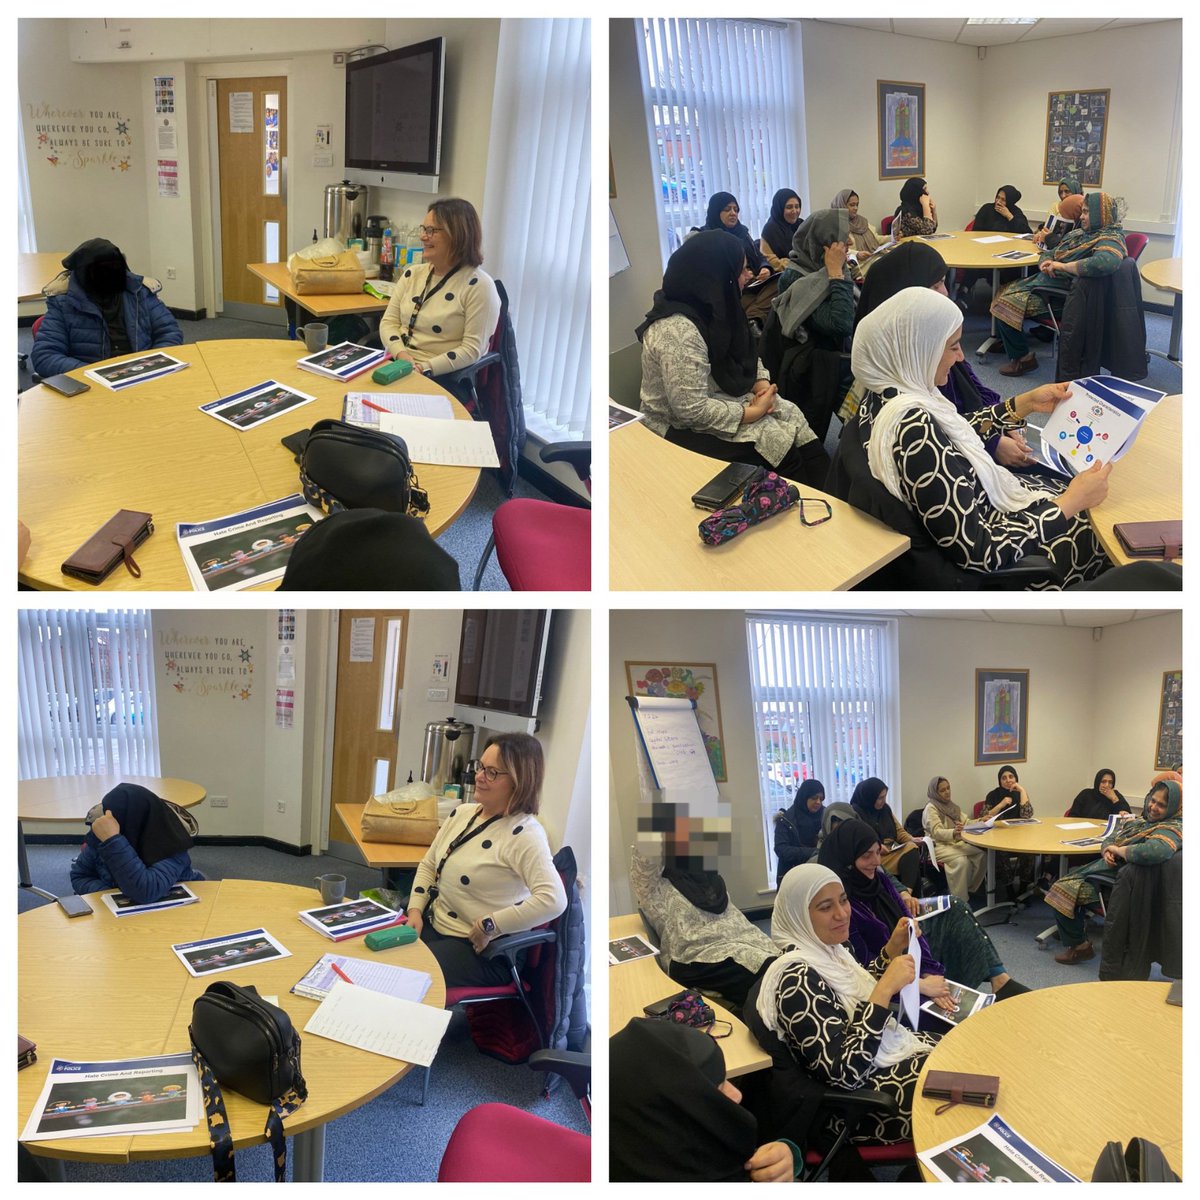 @Coppiceprimary CHAI, this morning the amazing mums made lovely #Ramadan    decor & cards- learninh creative activities to do at home with their children on a budget. Last week they discussed #hatecrime & victim support with GMP Inspector Stacey. #awareness #confidence #skills